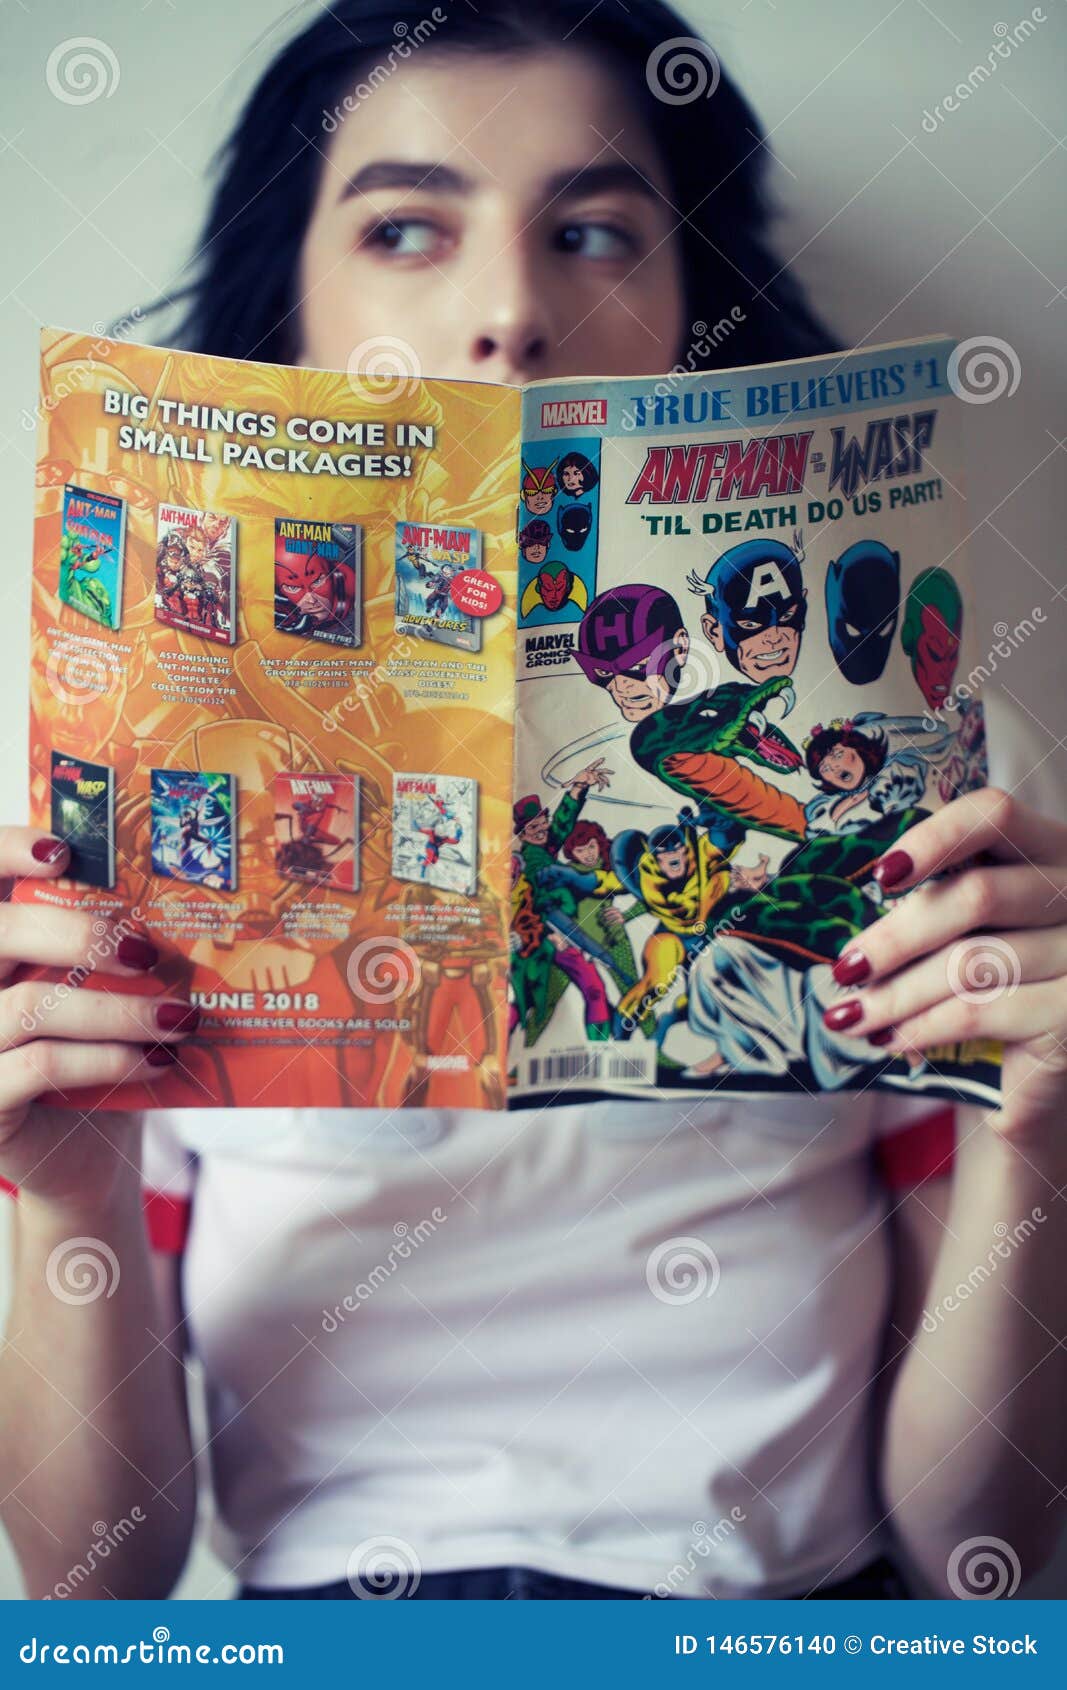 How To Read A Comic Book Girl reading comics editorial image. Image of superhero - 146576140